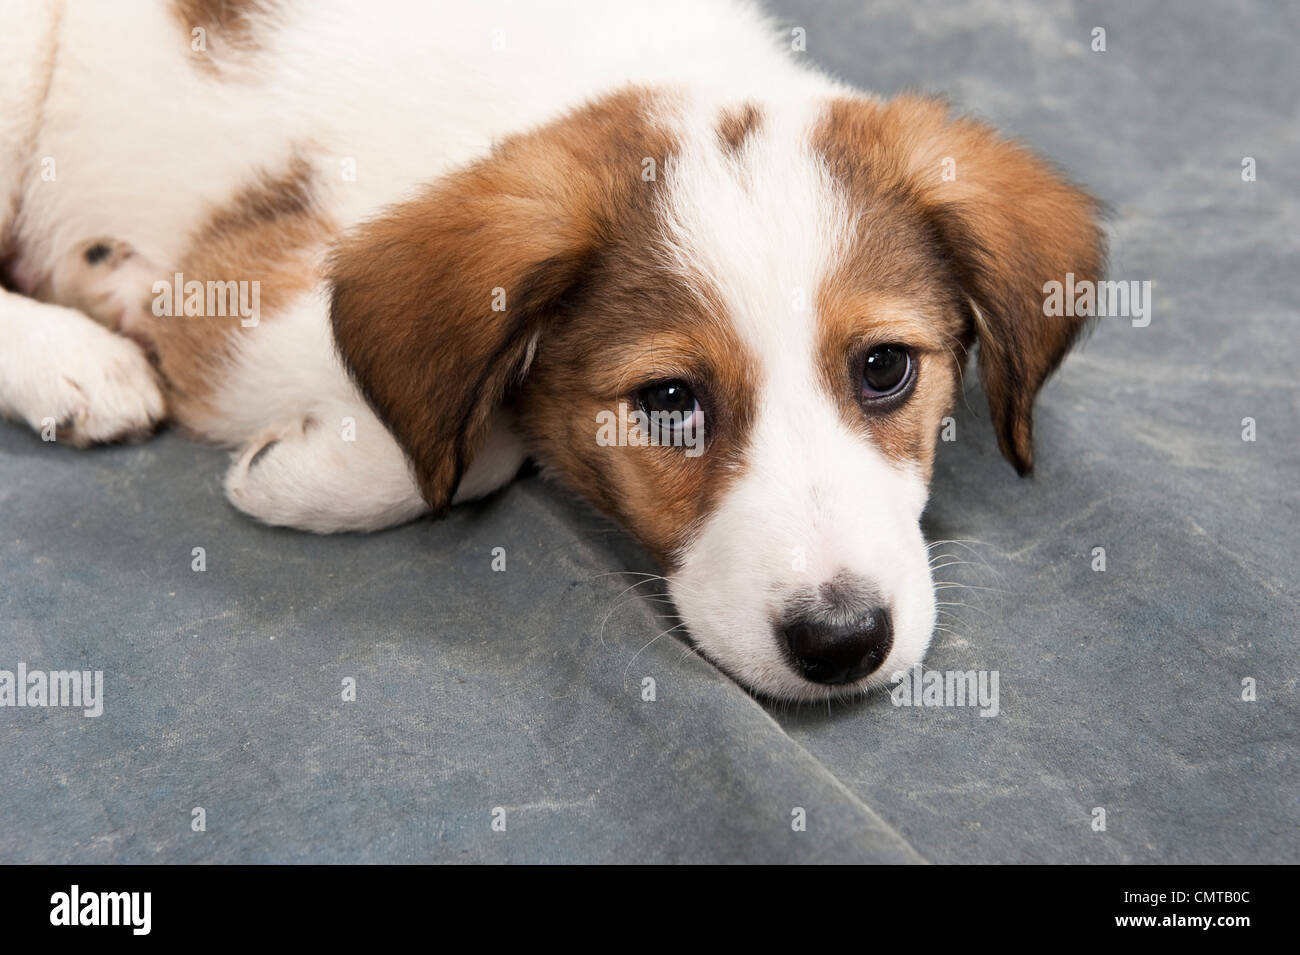 A pet puppy dog looking cute and being quiet Stock Photo